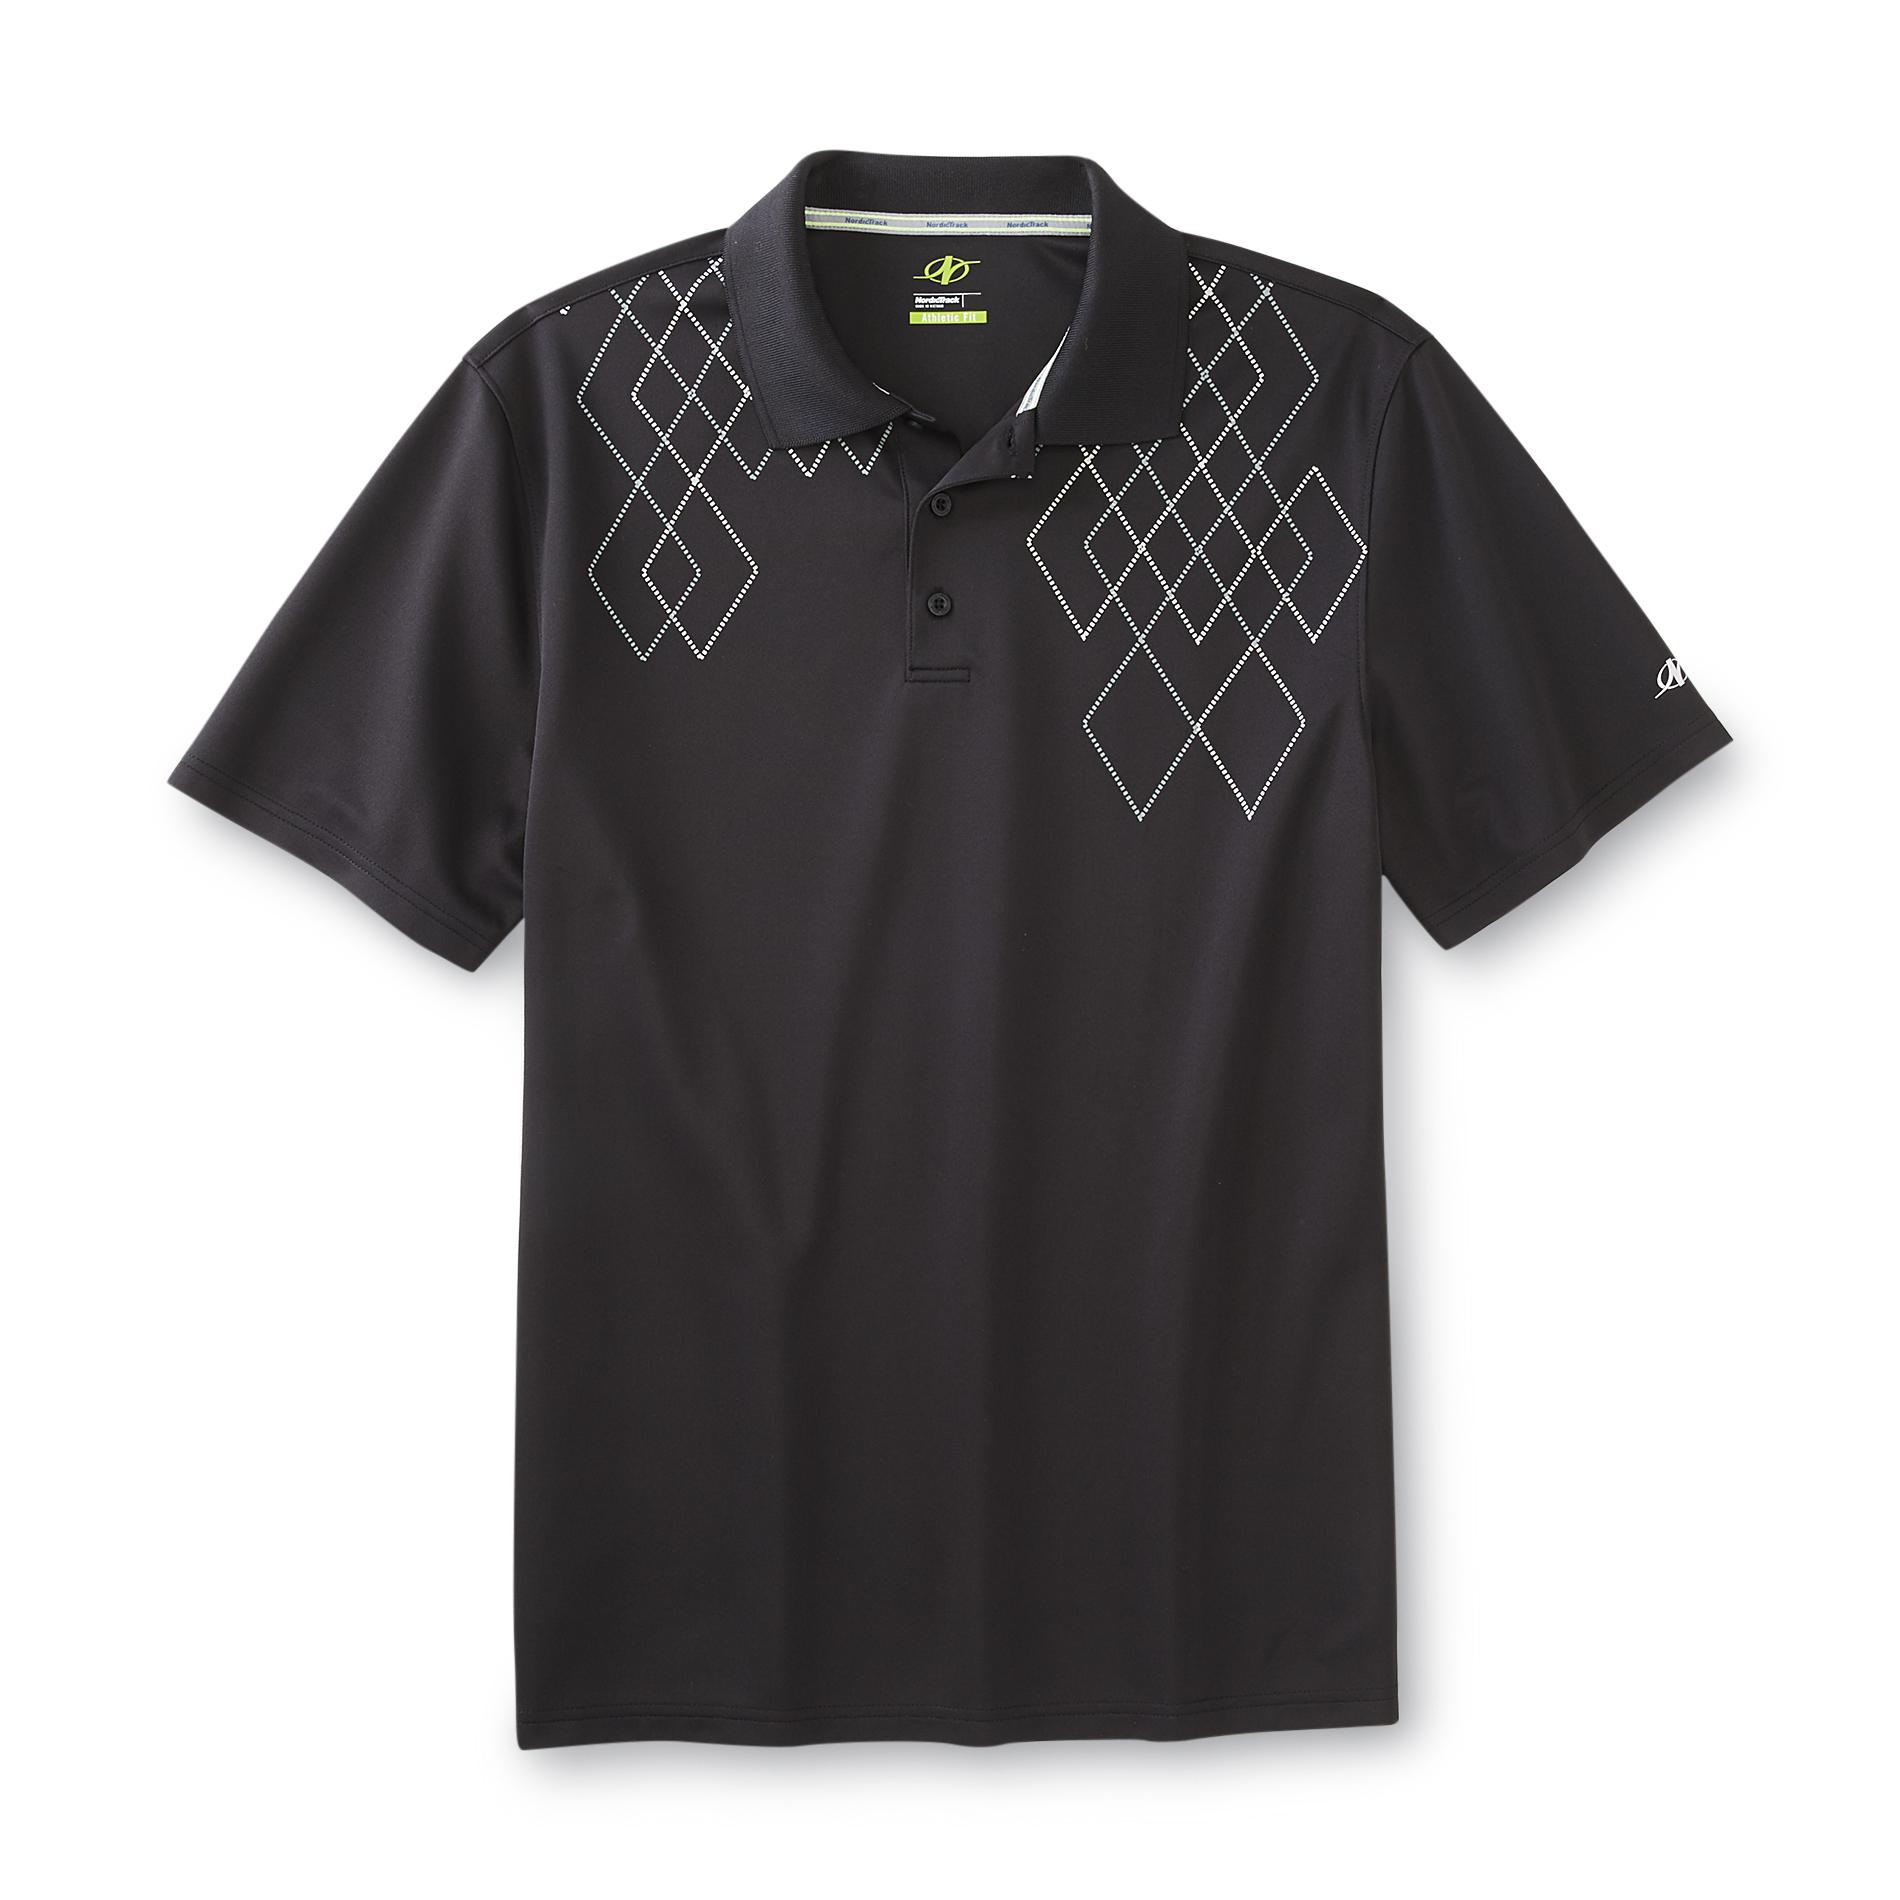 NordicTrack Men's Athletic Polo Shirt